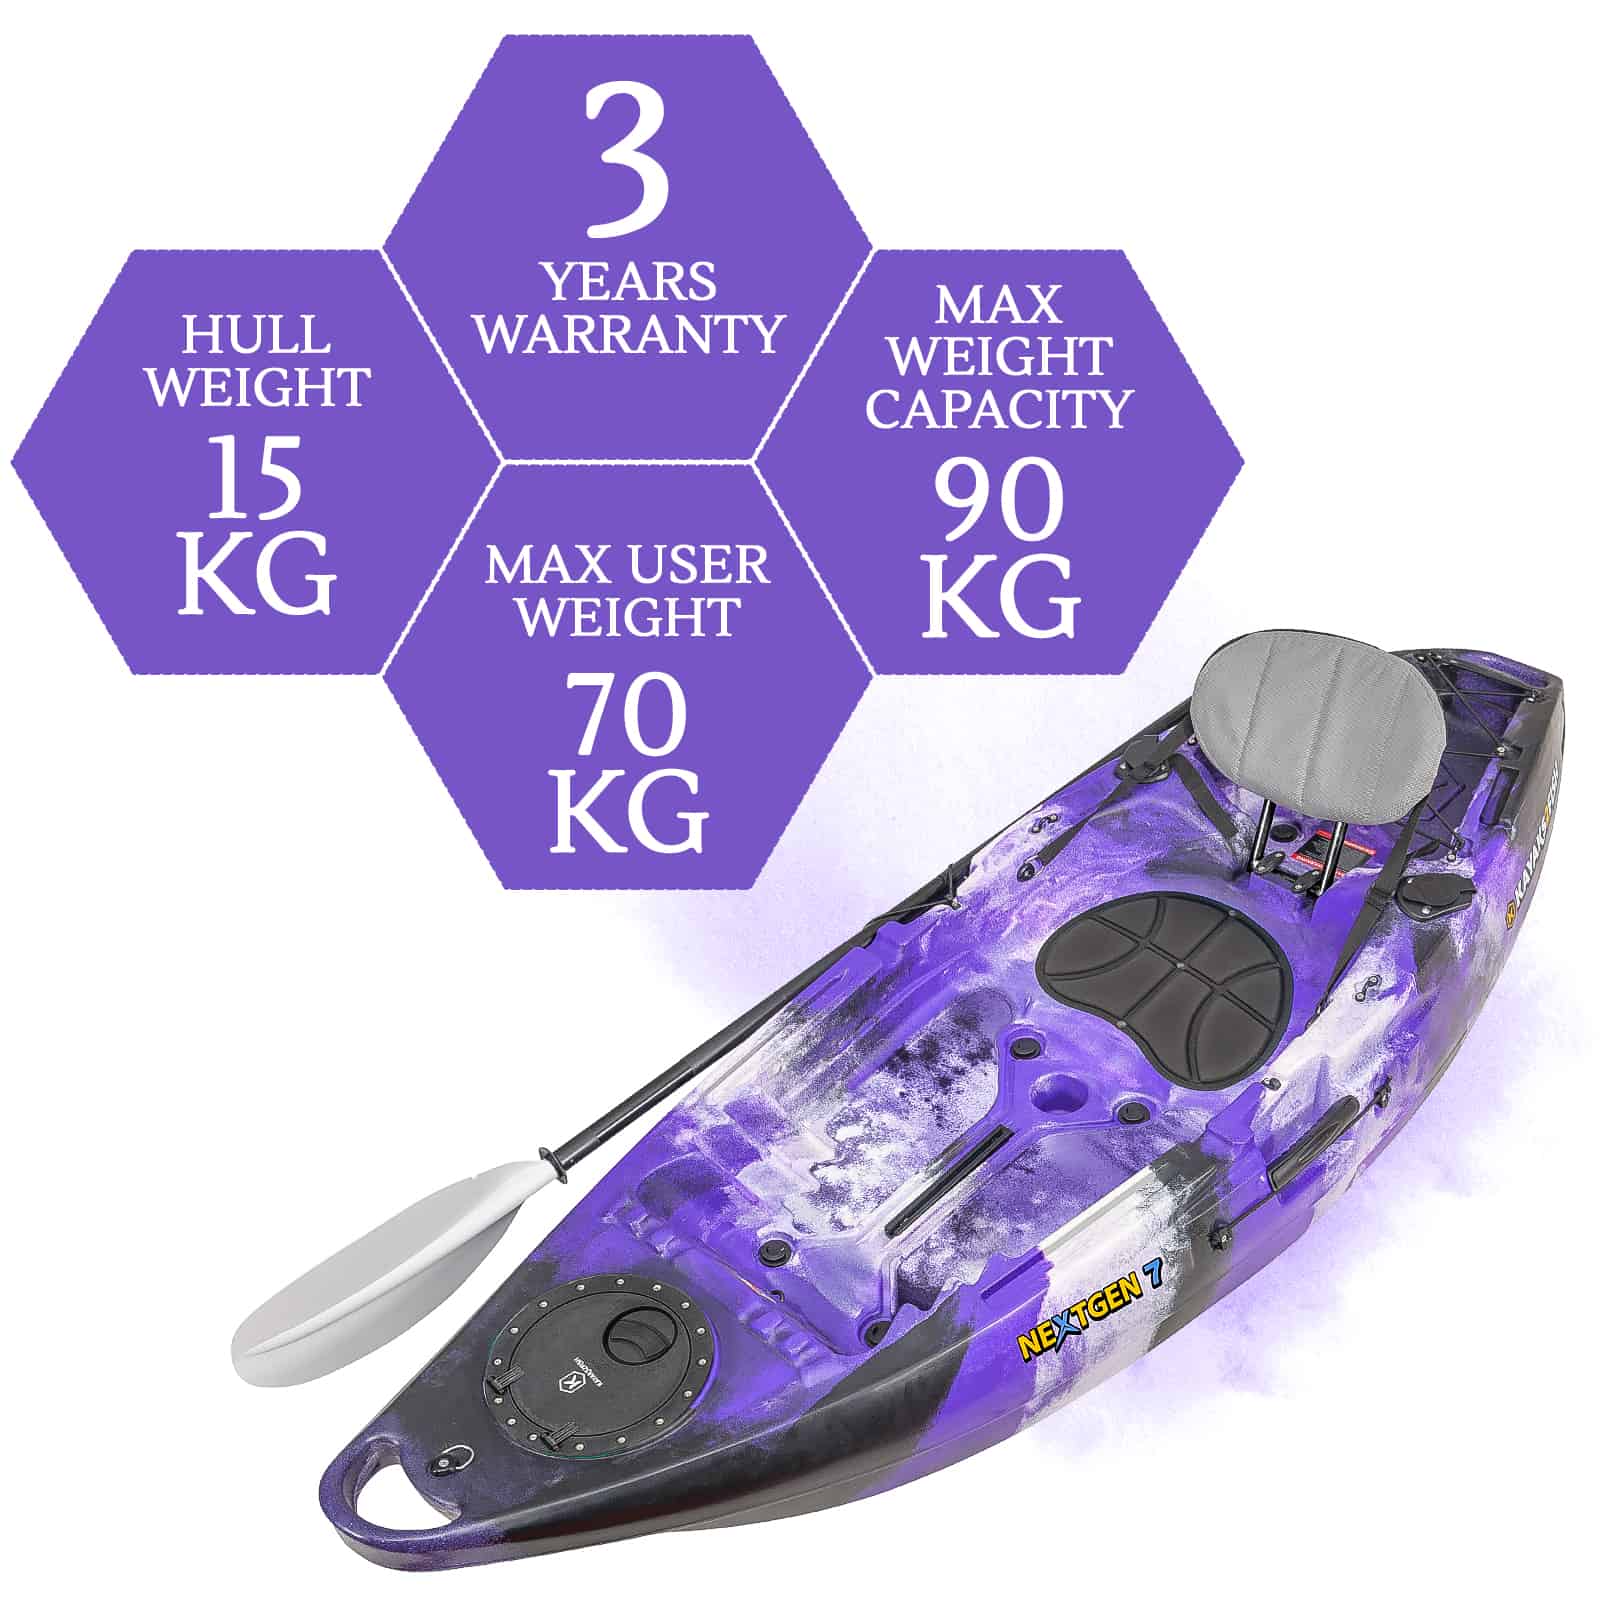 NGS-07-PURPLECAMO specifications